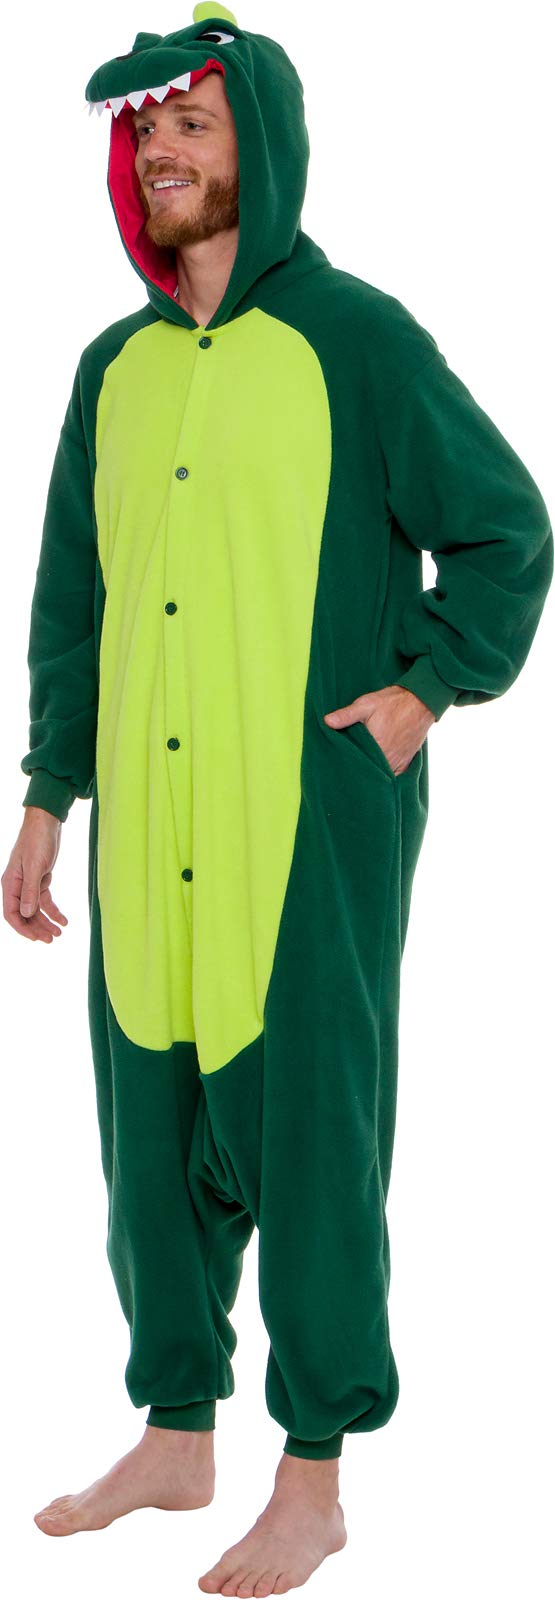 Dinosaur Adult Onesie - T-Rex Halloween Costume - Plush Dino One Piece Cosplay Suit for Adults, Women and Men FUNZIEZ!